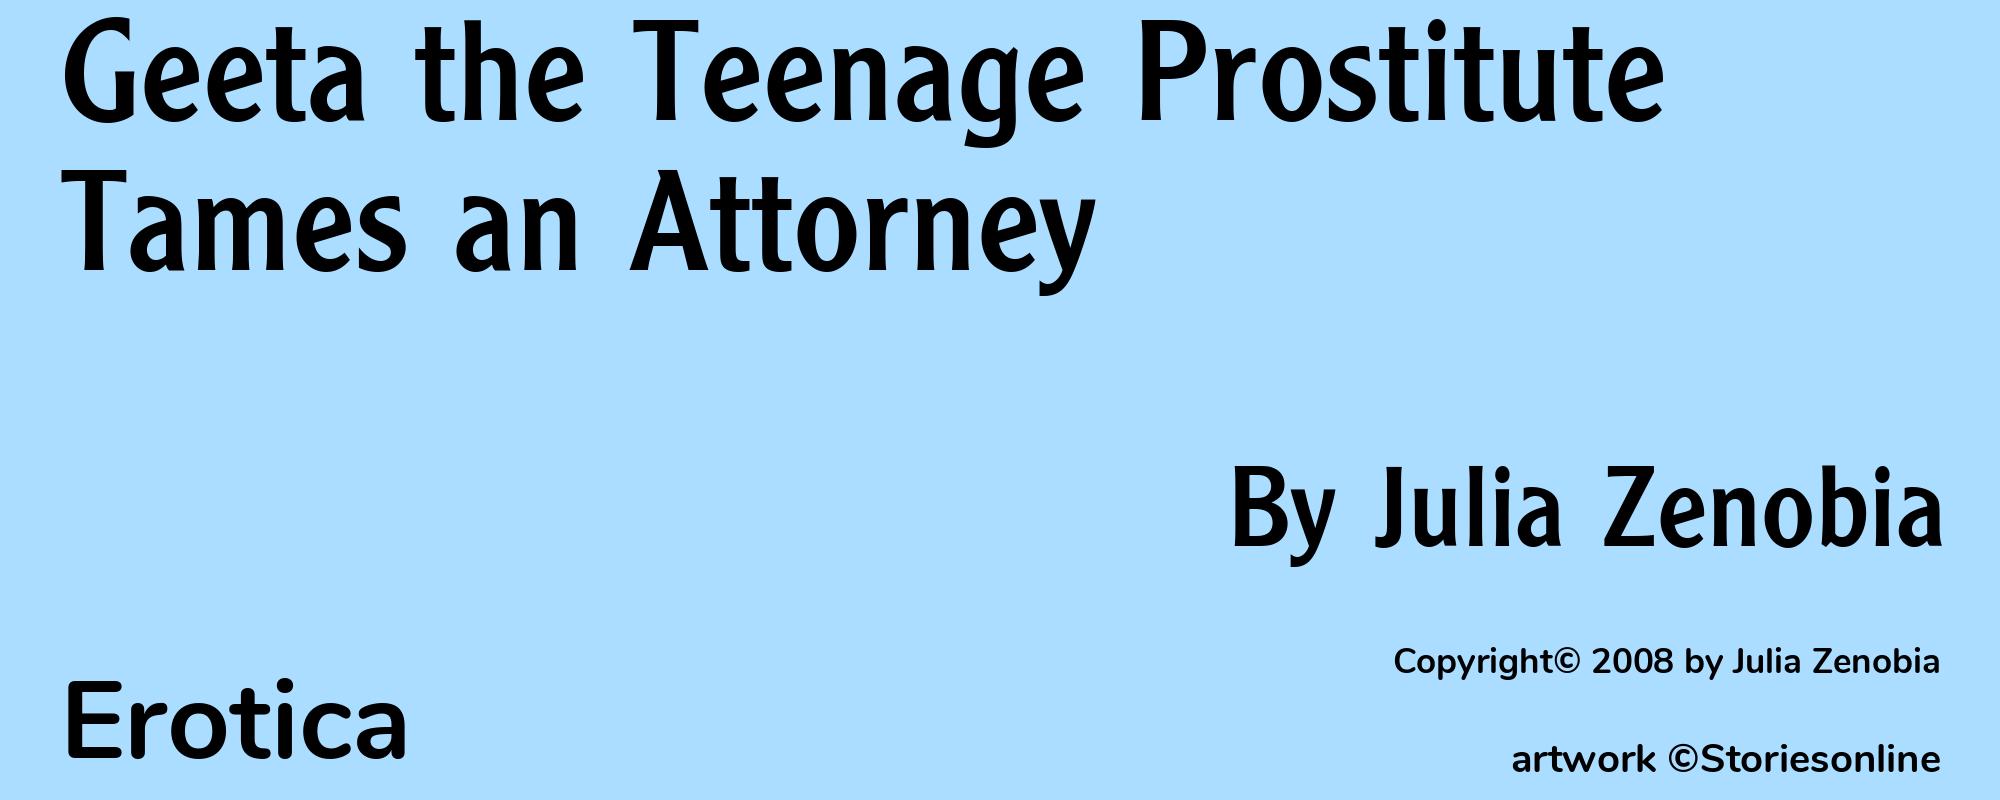 Geeta the Teenage Prostitute Tames an Attorney - Cover